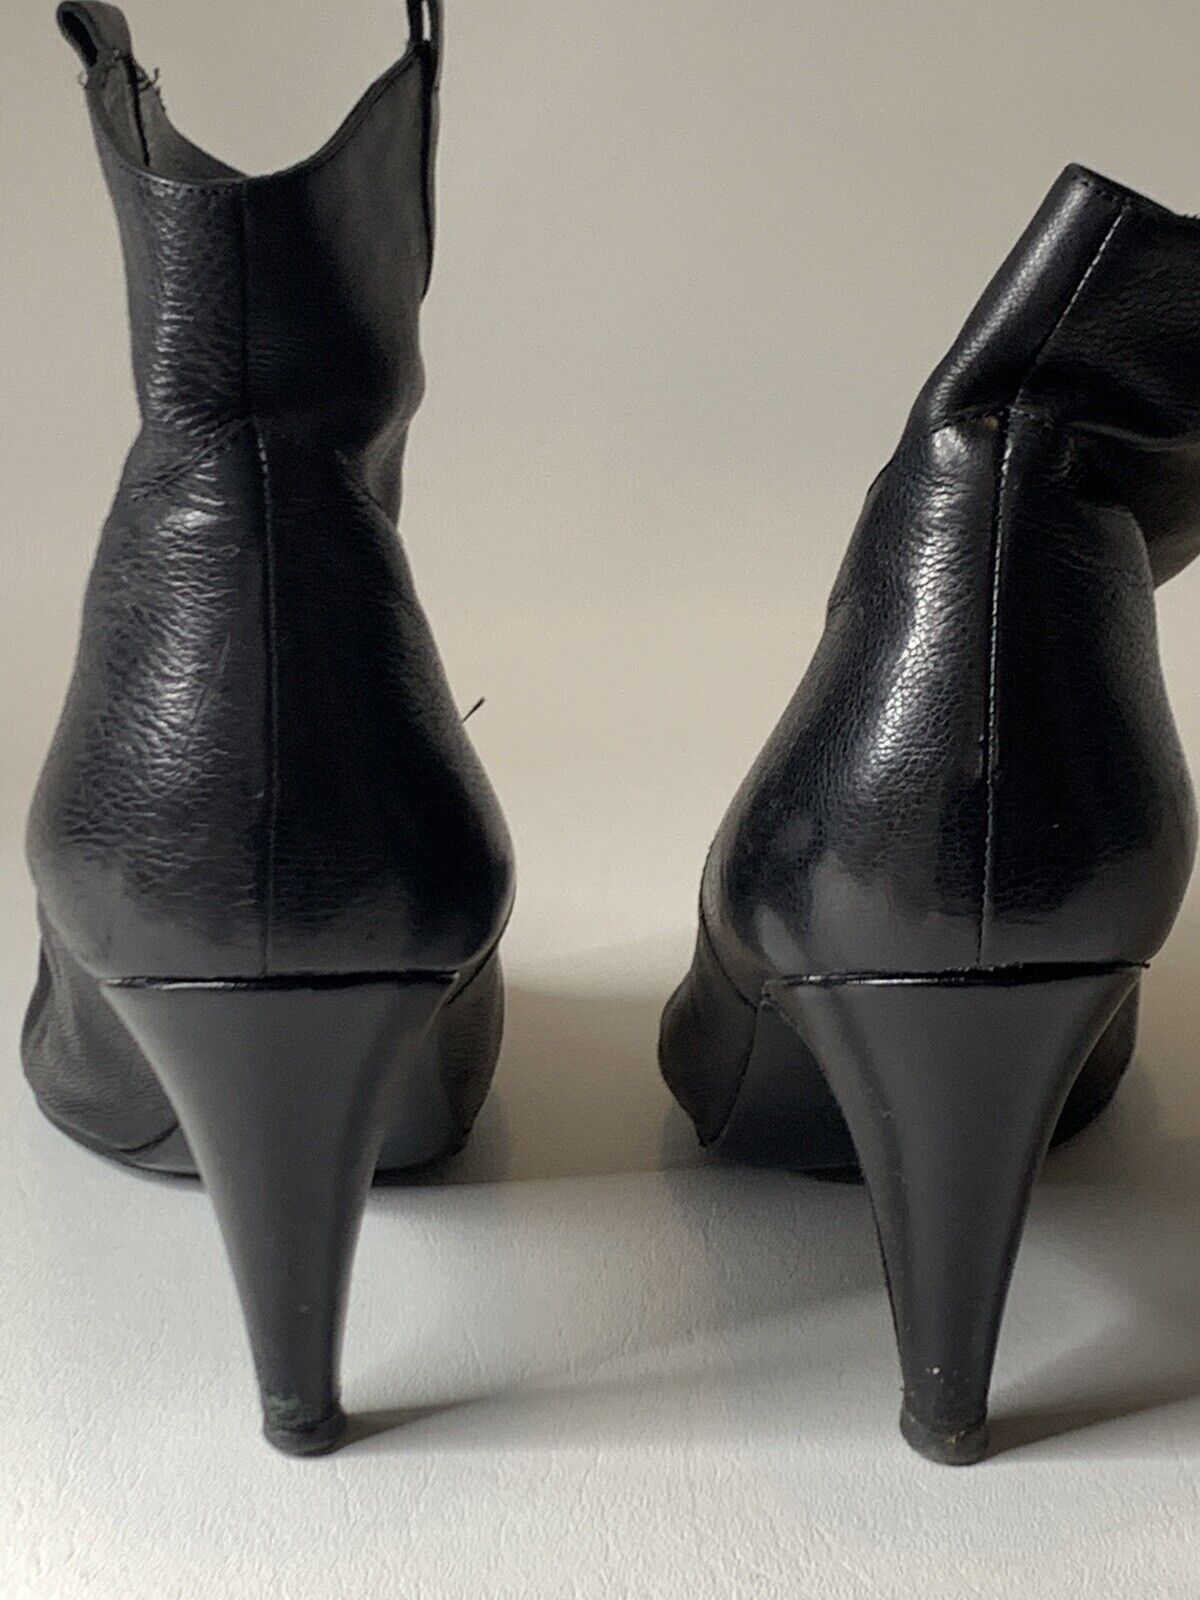 CHANEL  Black Leather Bootie 3.25" Heel | Double C Stitching at Toe | 38.5" CHANEL - фотография #5